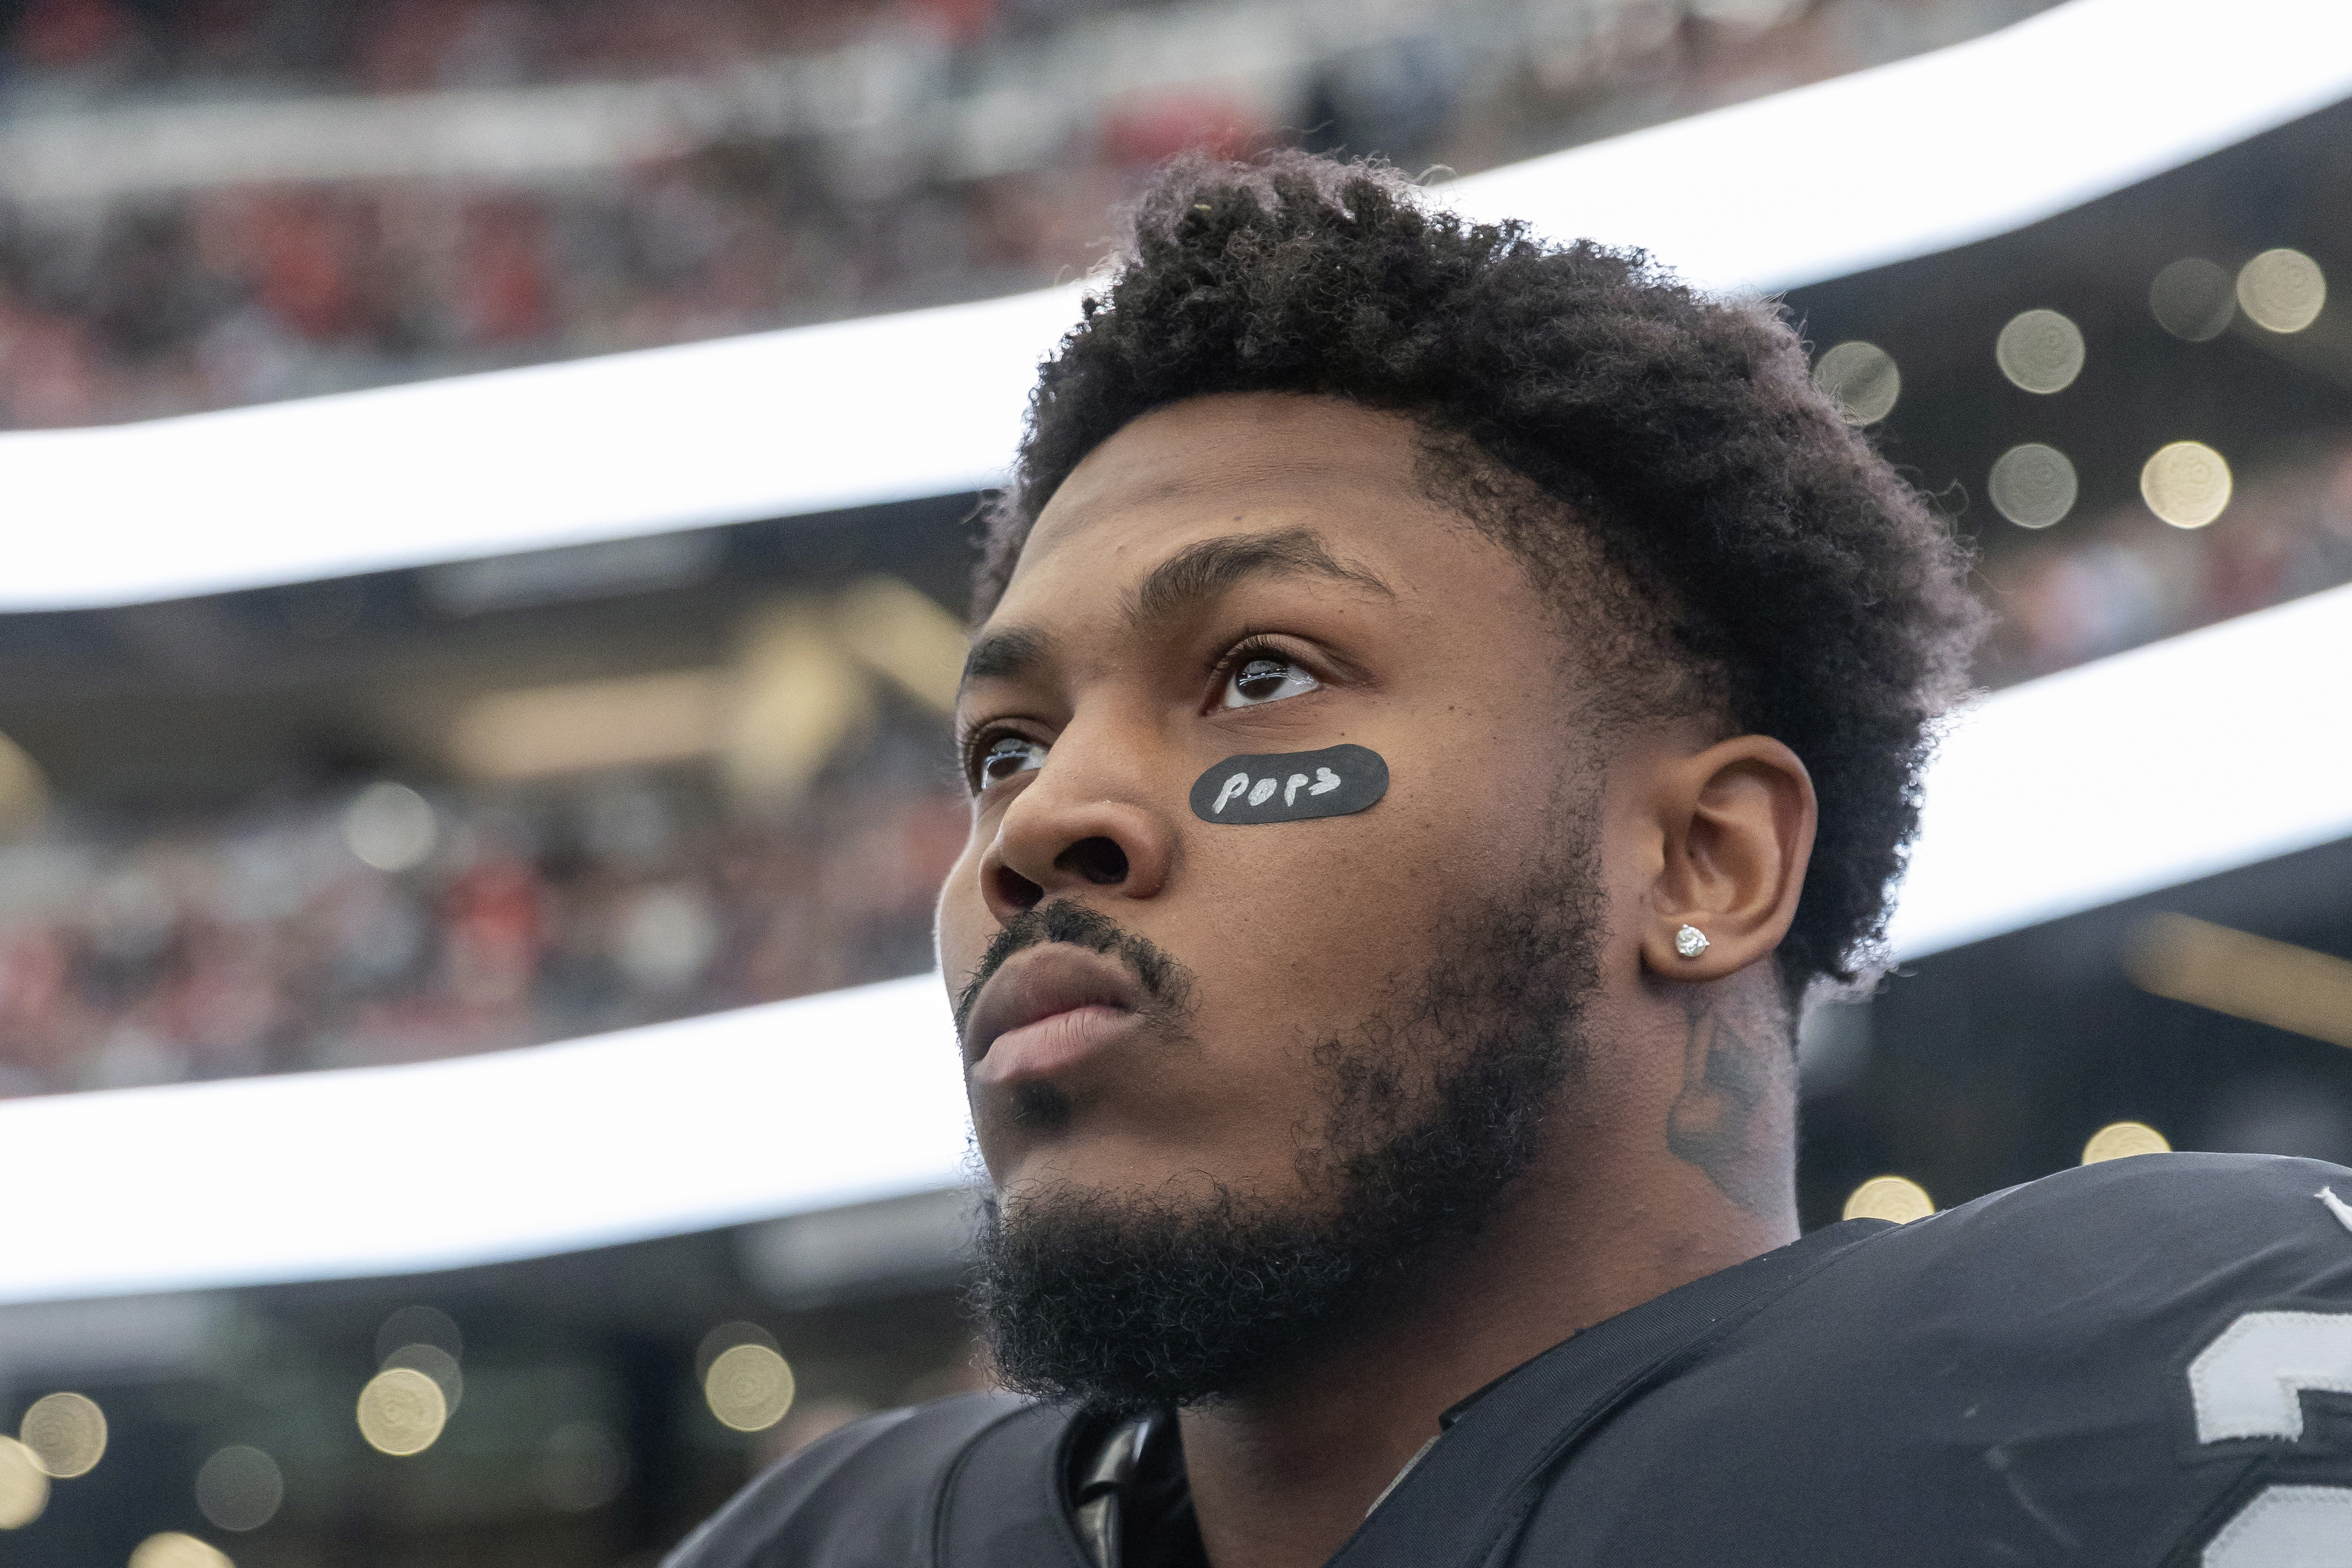 LOOK: All-black Raiders uniform mock-up and RB Josh Jacobs approves